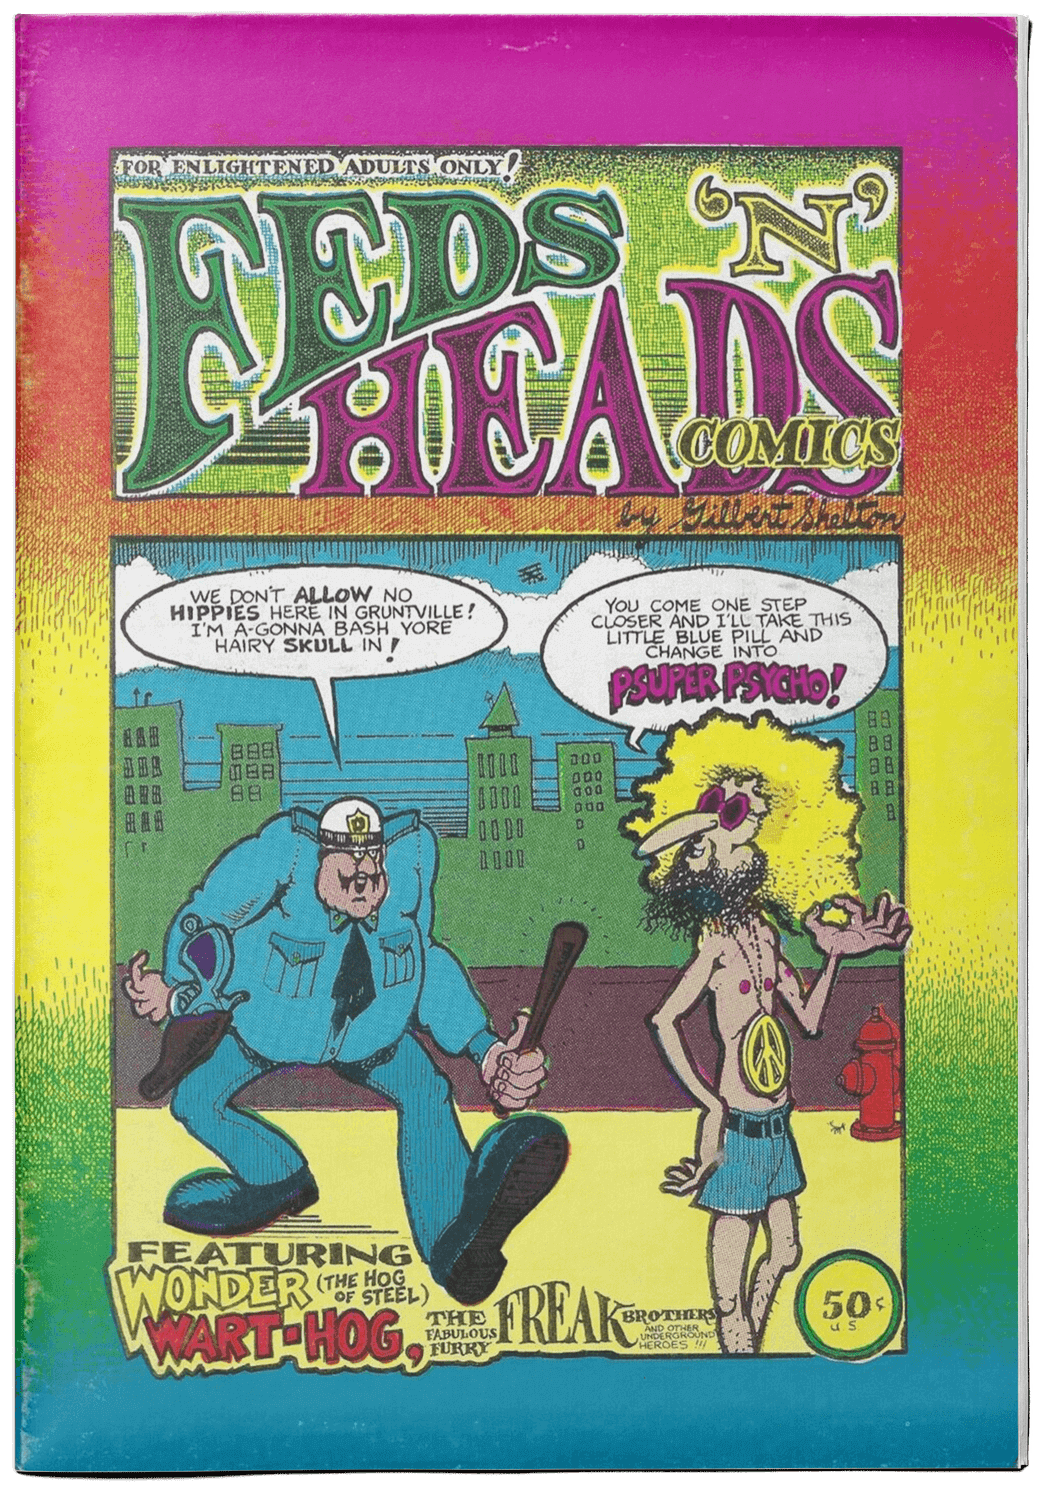 The Feds n Heads comic cover